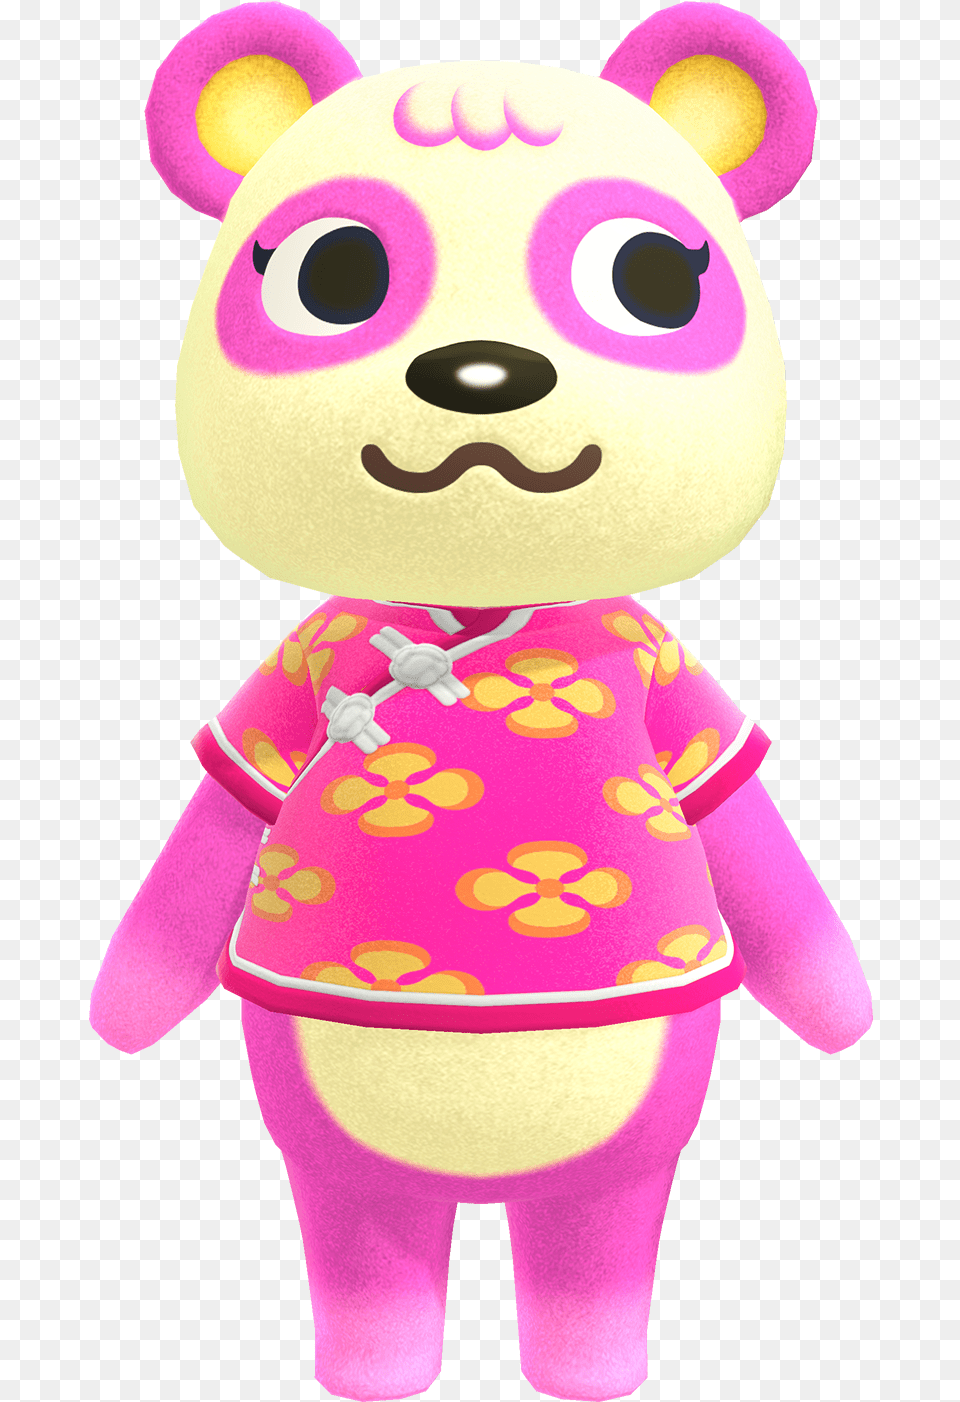 Pinky Animal Crossing Villagers Pinky, Plush, Toy Free Png Download